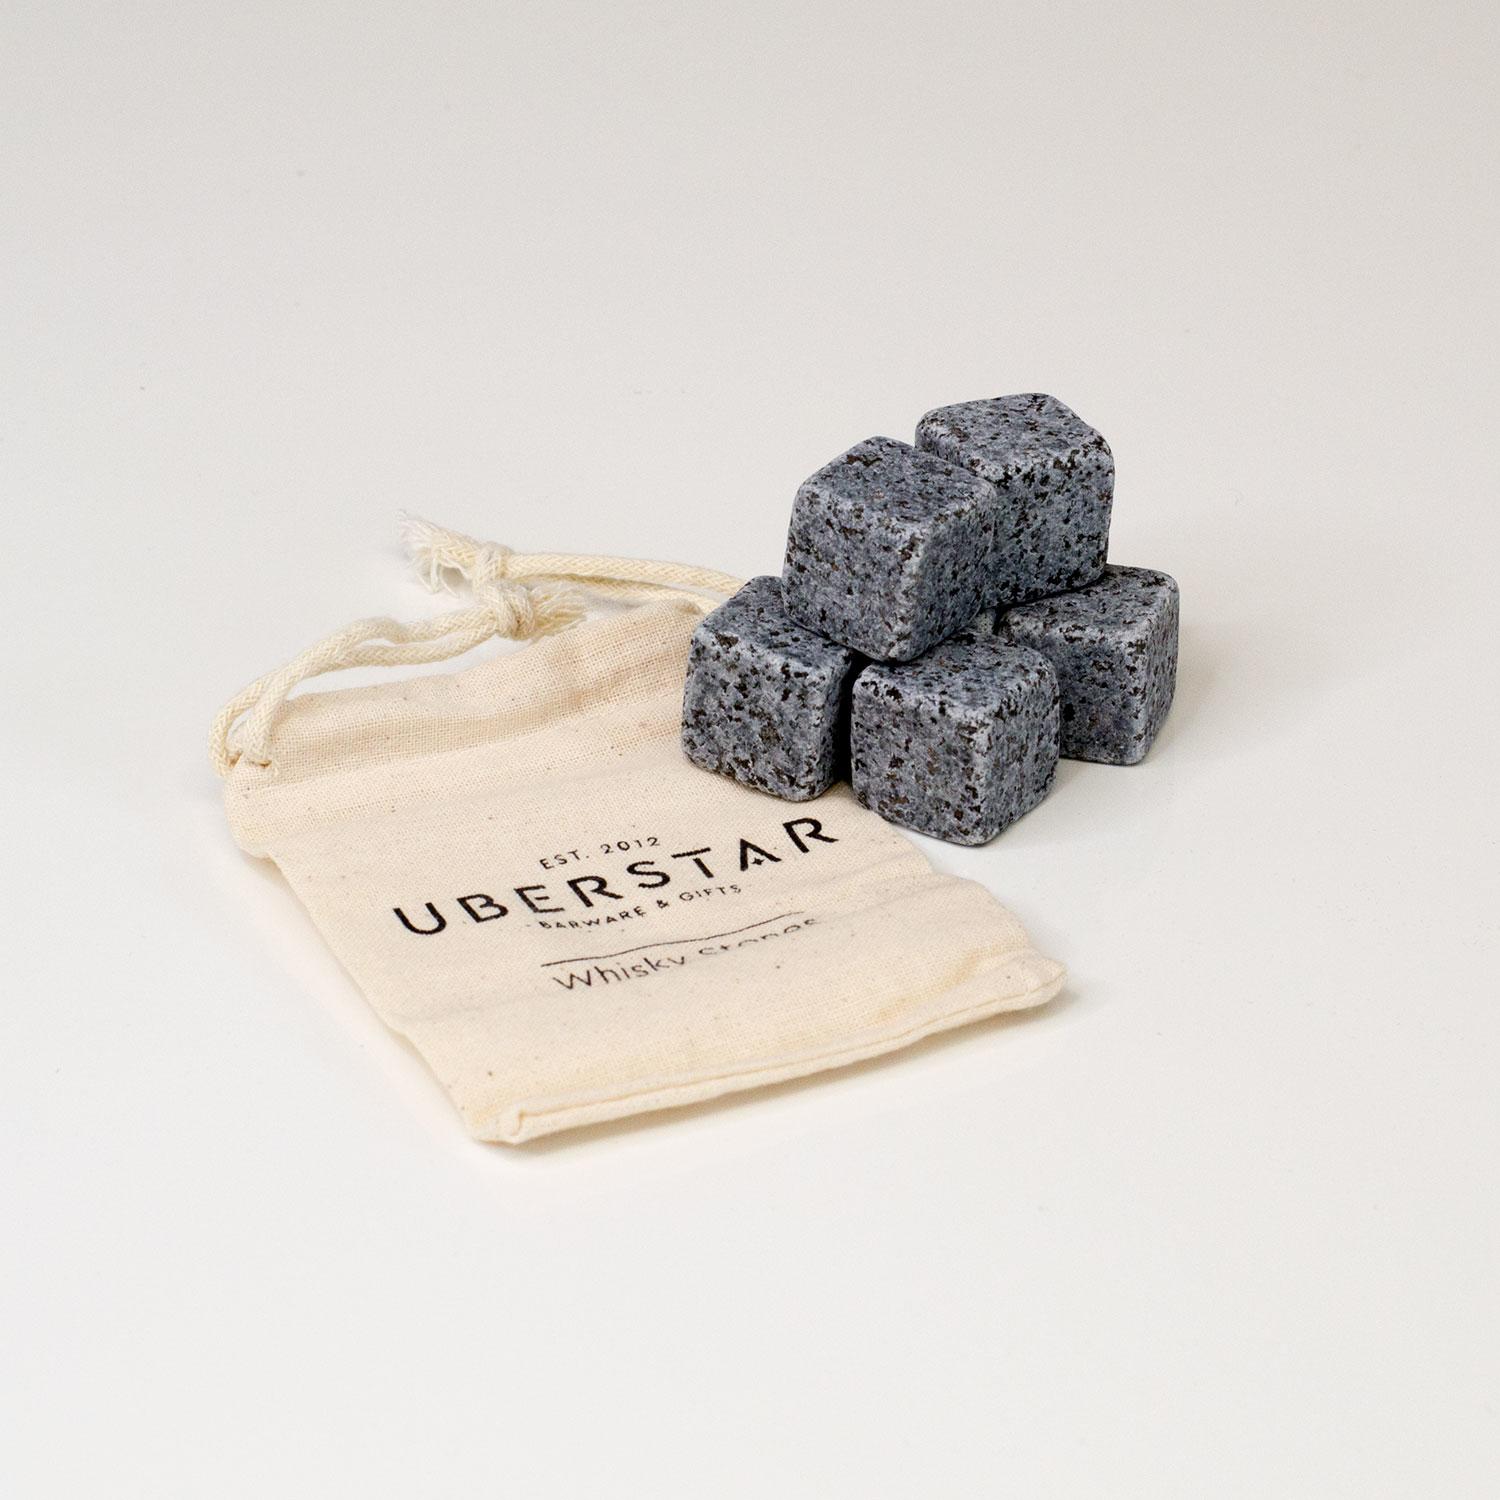 Uberstar Whisky Stones Set of 6 Cooling Ice Cubes